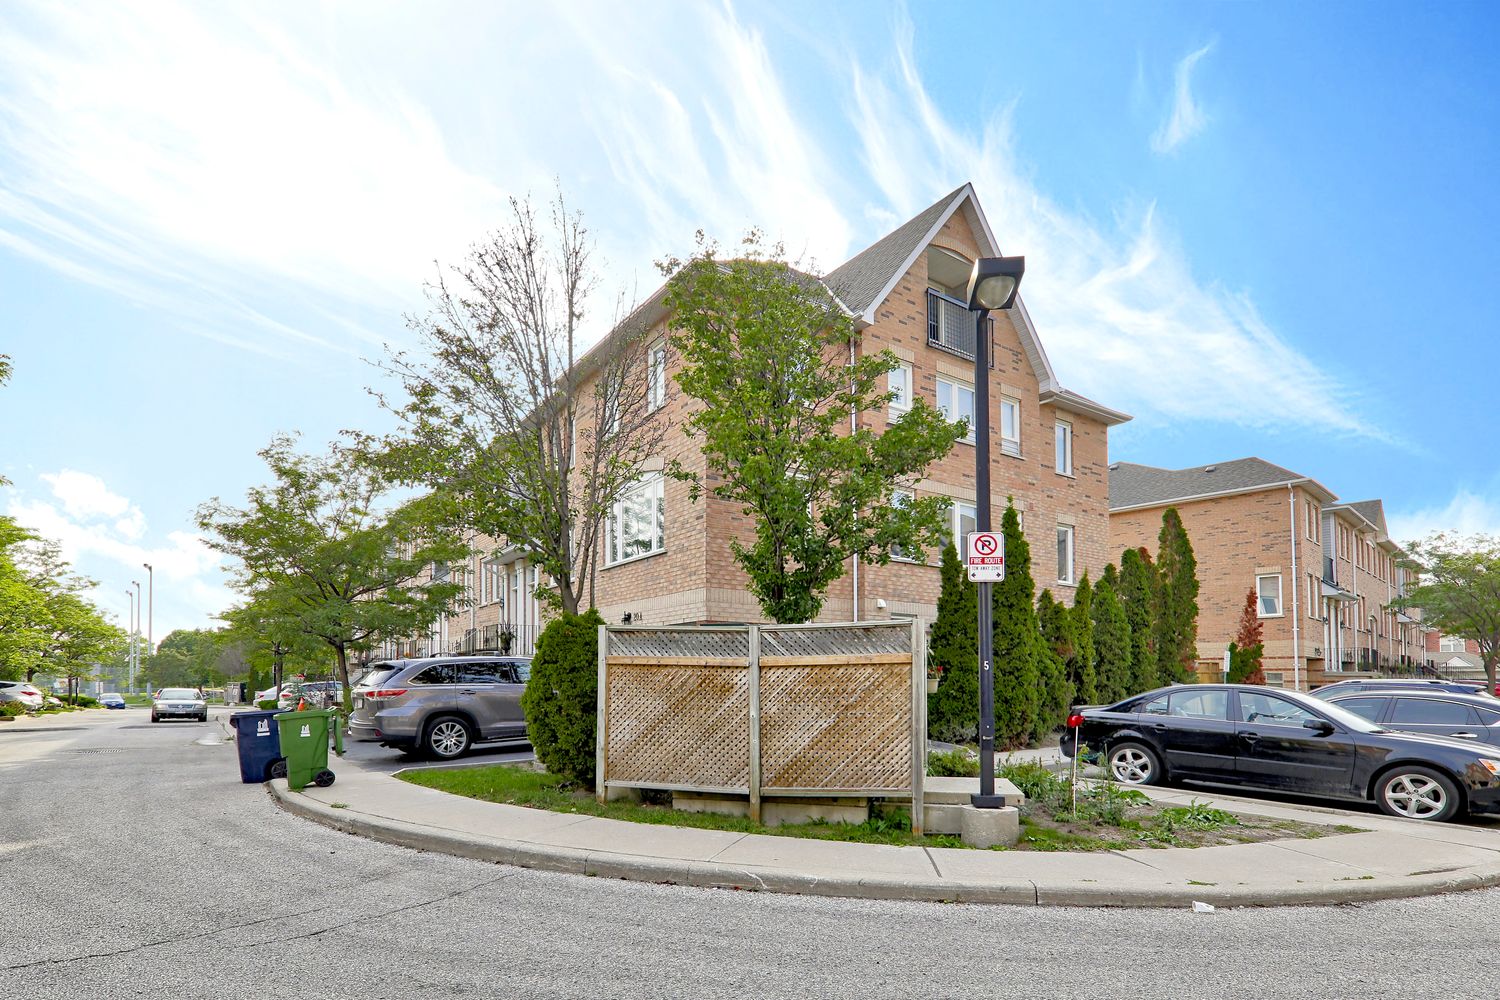 2-22 Leaside Park Drive. Leaside Green Townhomes is located in  East York, Toronto - image #1 of 4